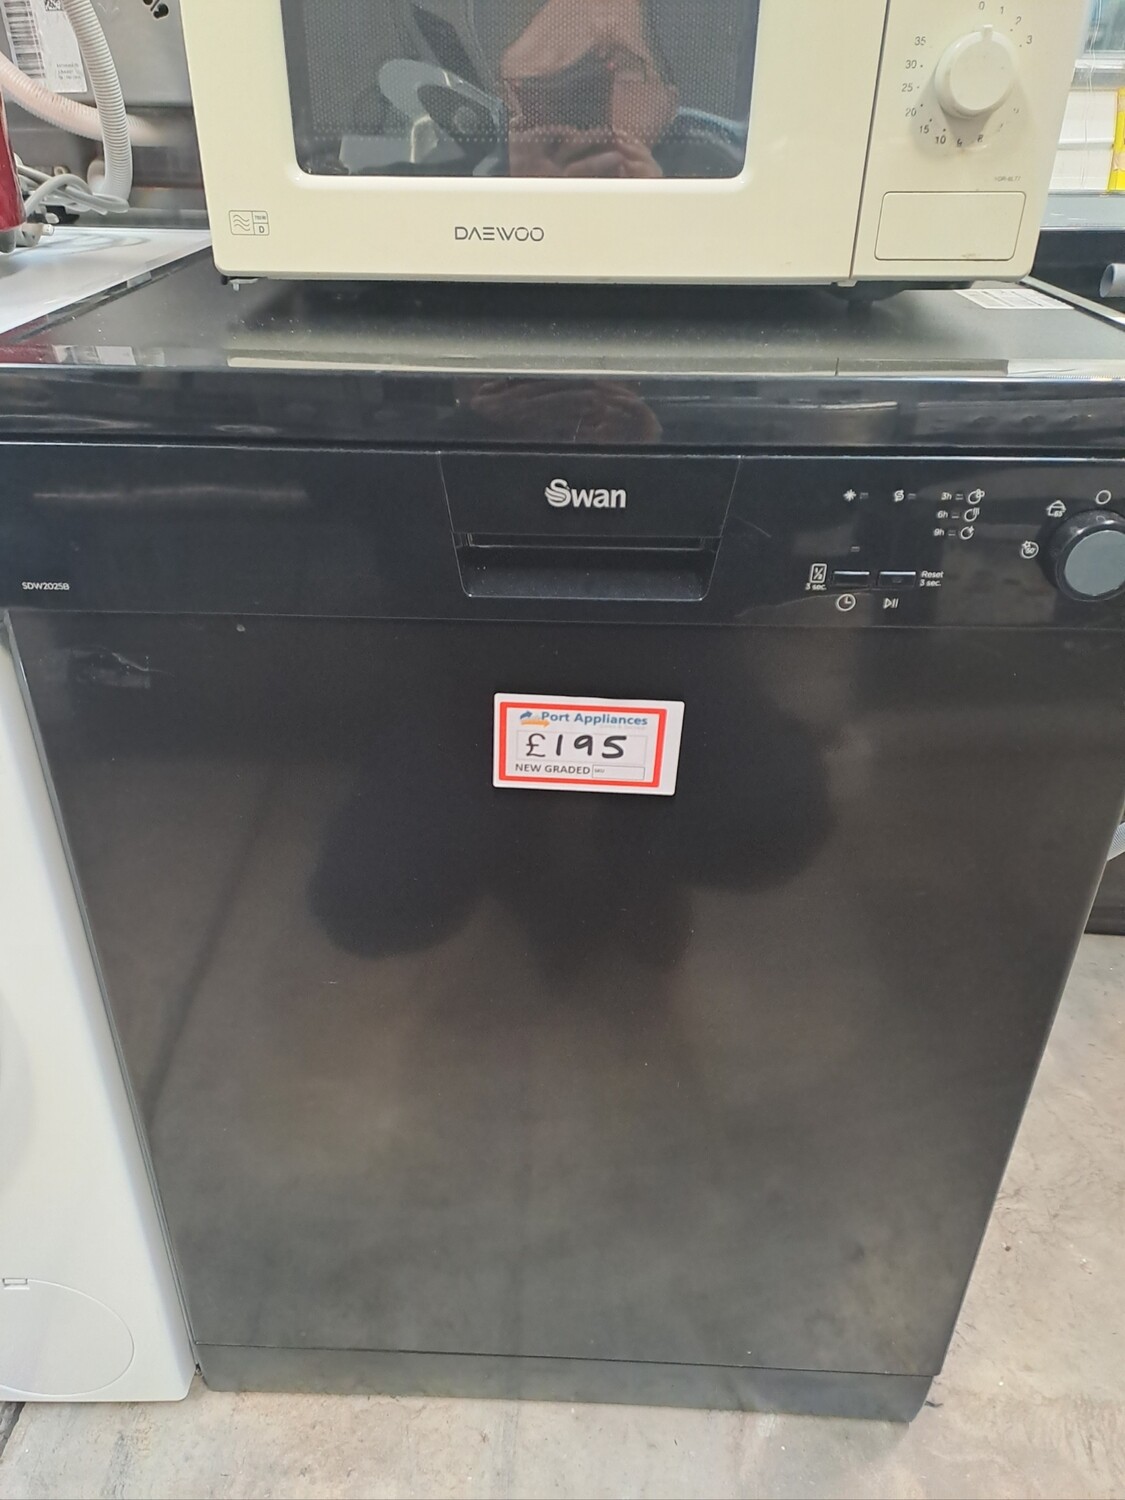 Swan SDW2025B 60cm Freestanding Full Size Dishwasher in Black - Graded + 12 Months Guarantee . This item is located in our Whitby Road Shop